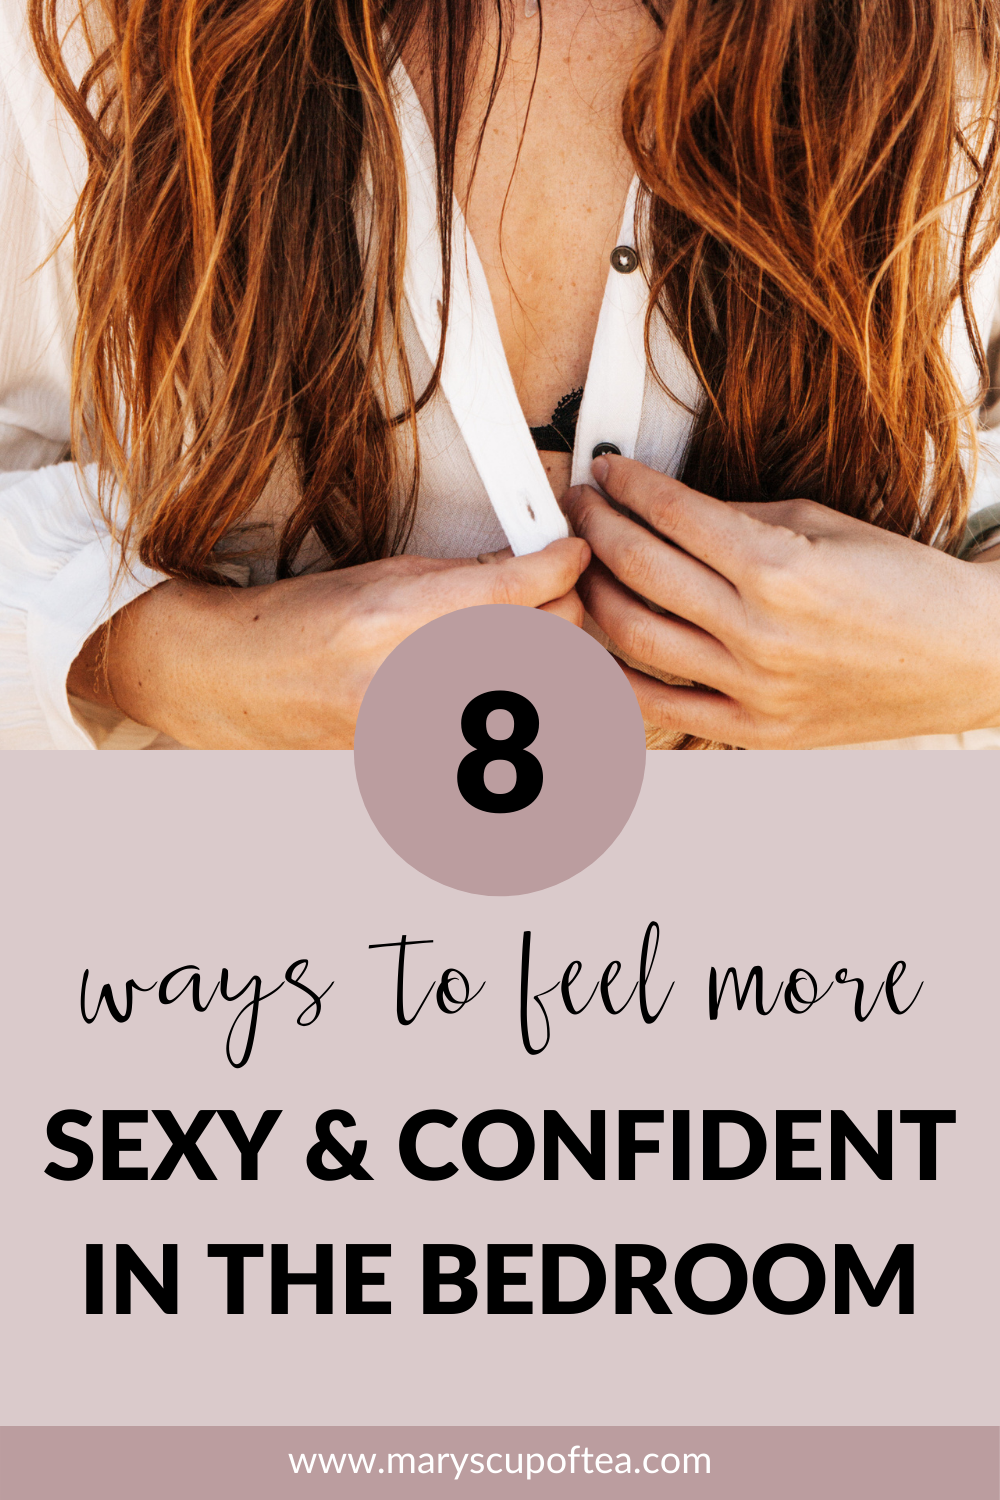 Learn how to feel more confident and sexy in bed using these 8 simple tips. (Hint: #1 is to feel safe and comfortable!) Click through to read. #maryscupoftea #selflove #bodyconfidence